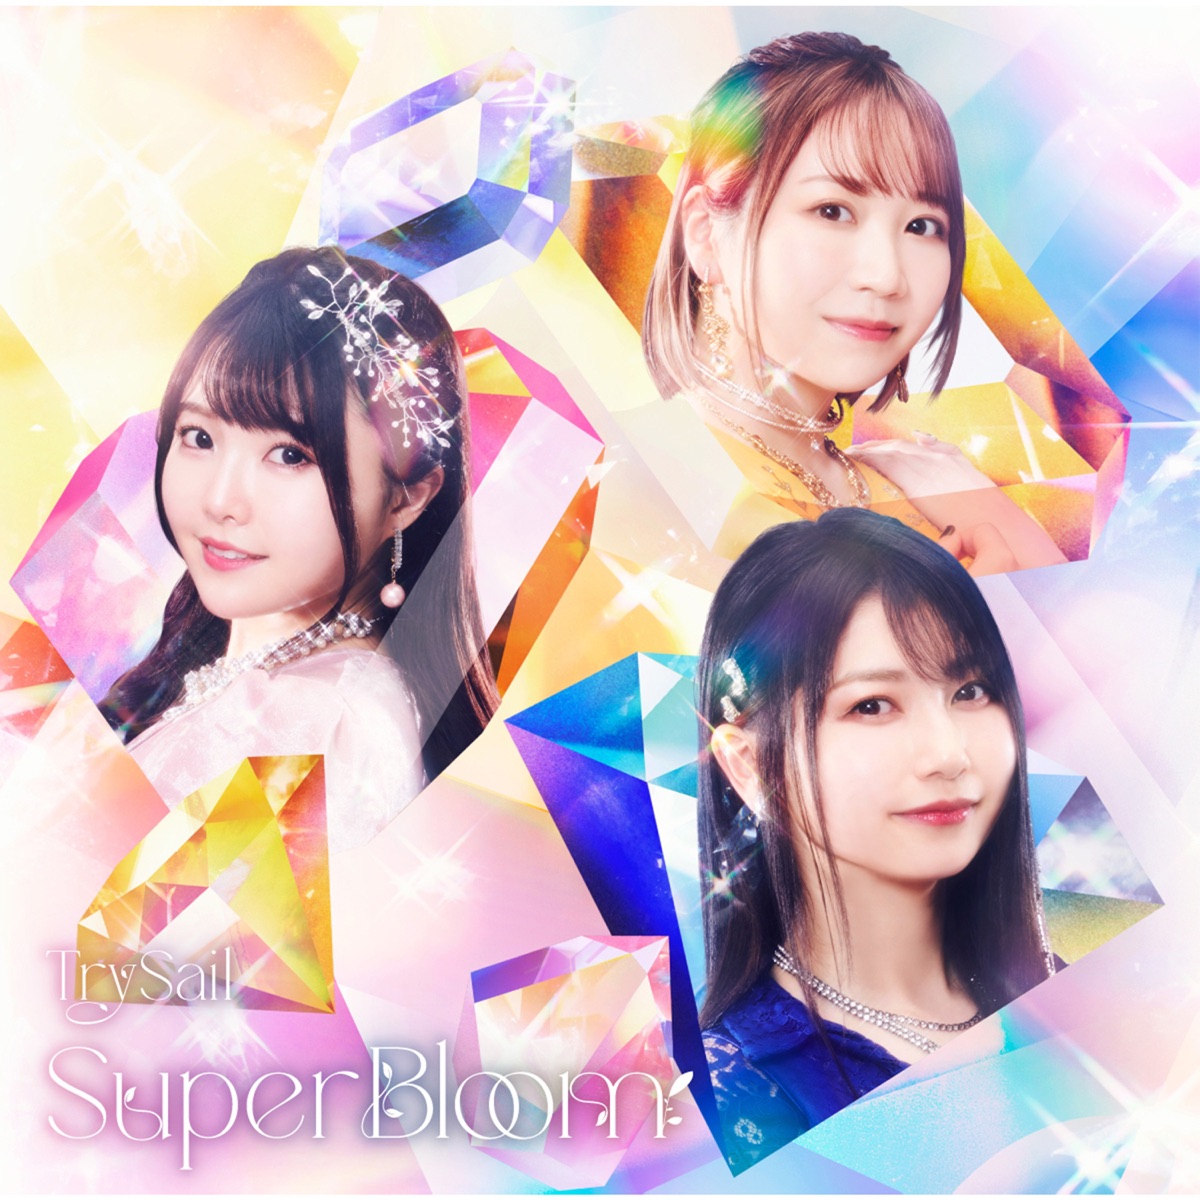 Cover art for『TrySail - Mermaid』from the release『SuperBloom』